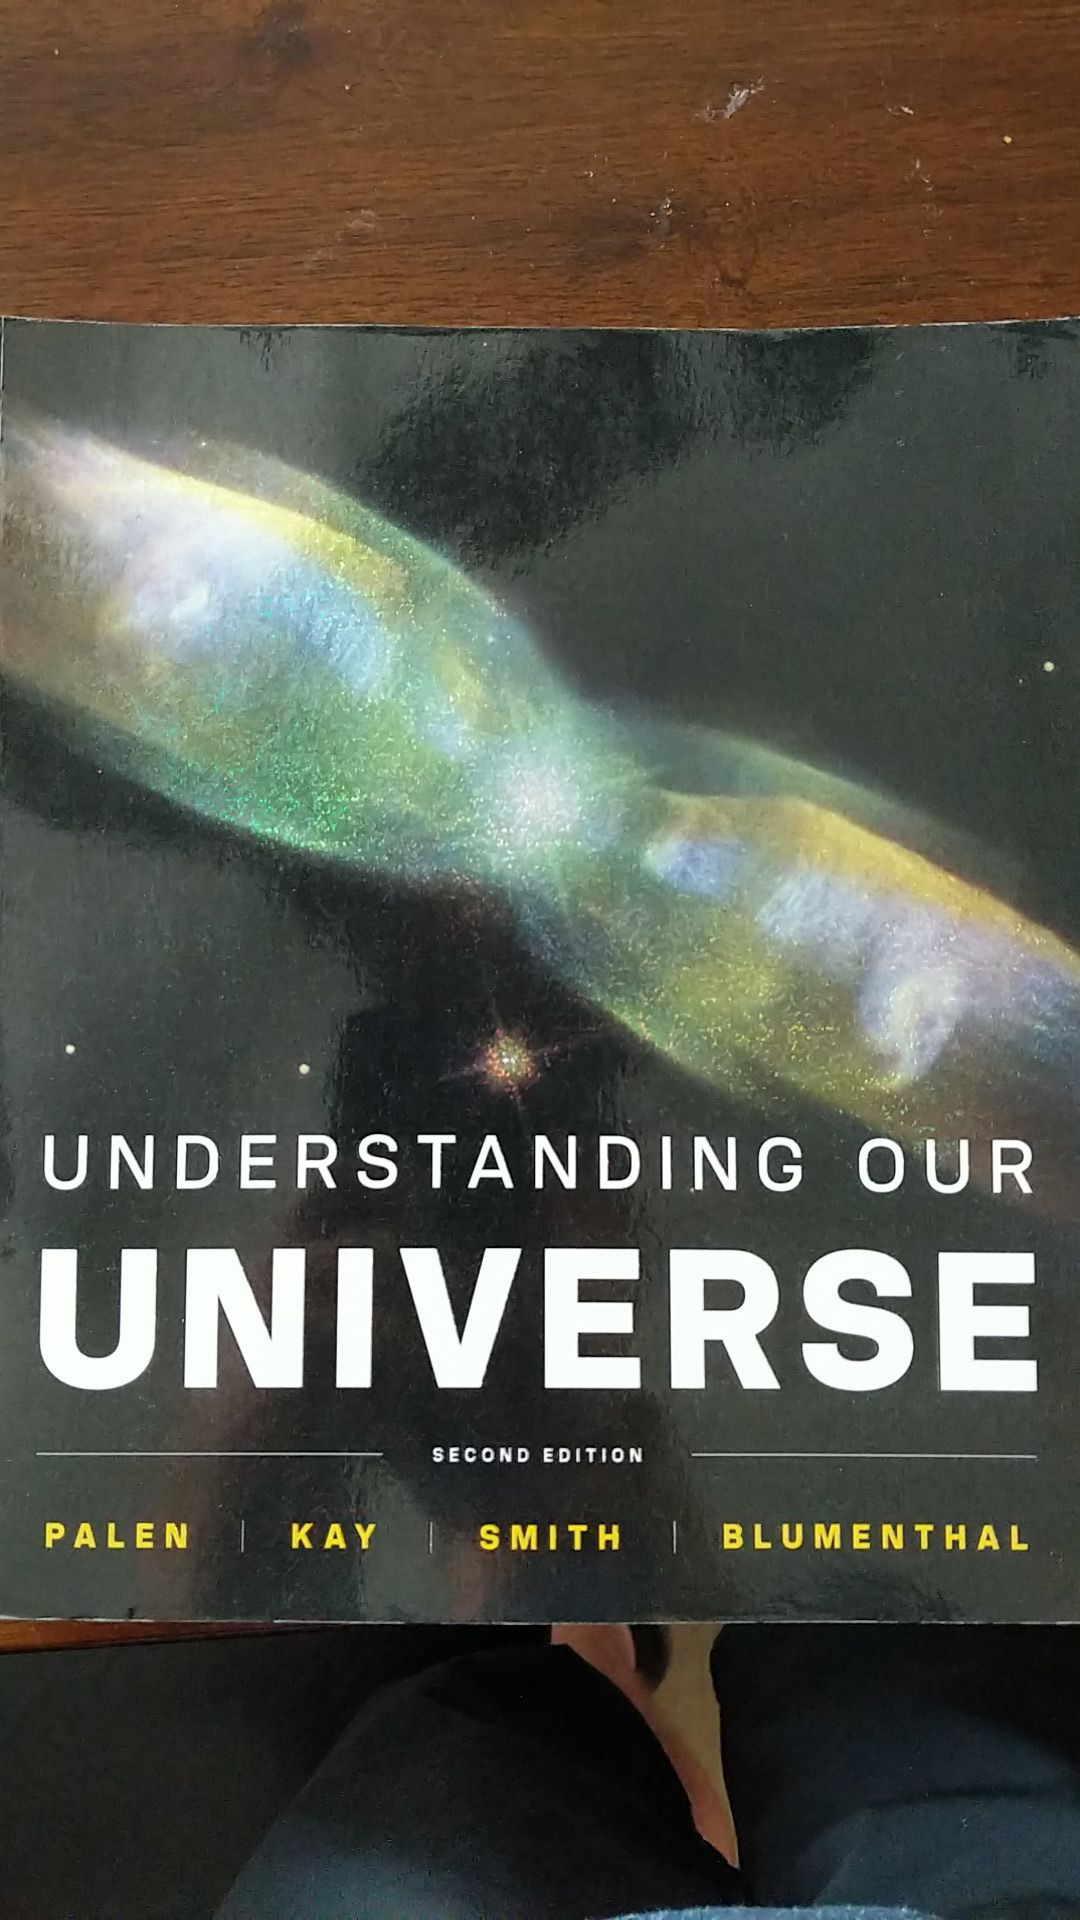 Understanding our universe second edition